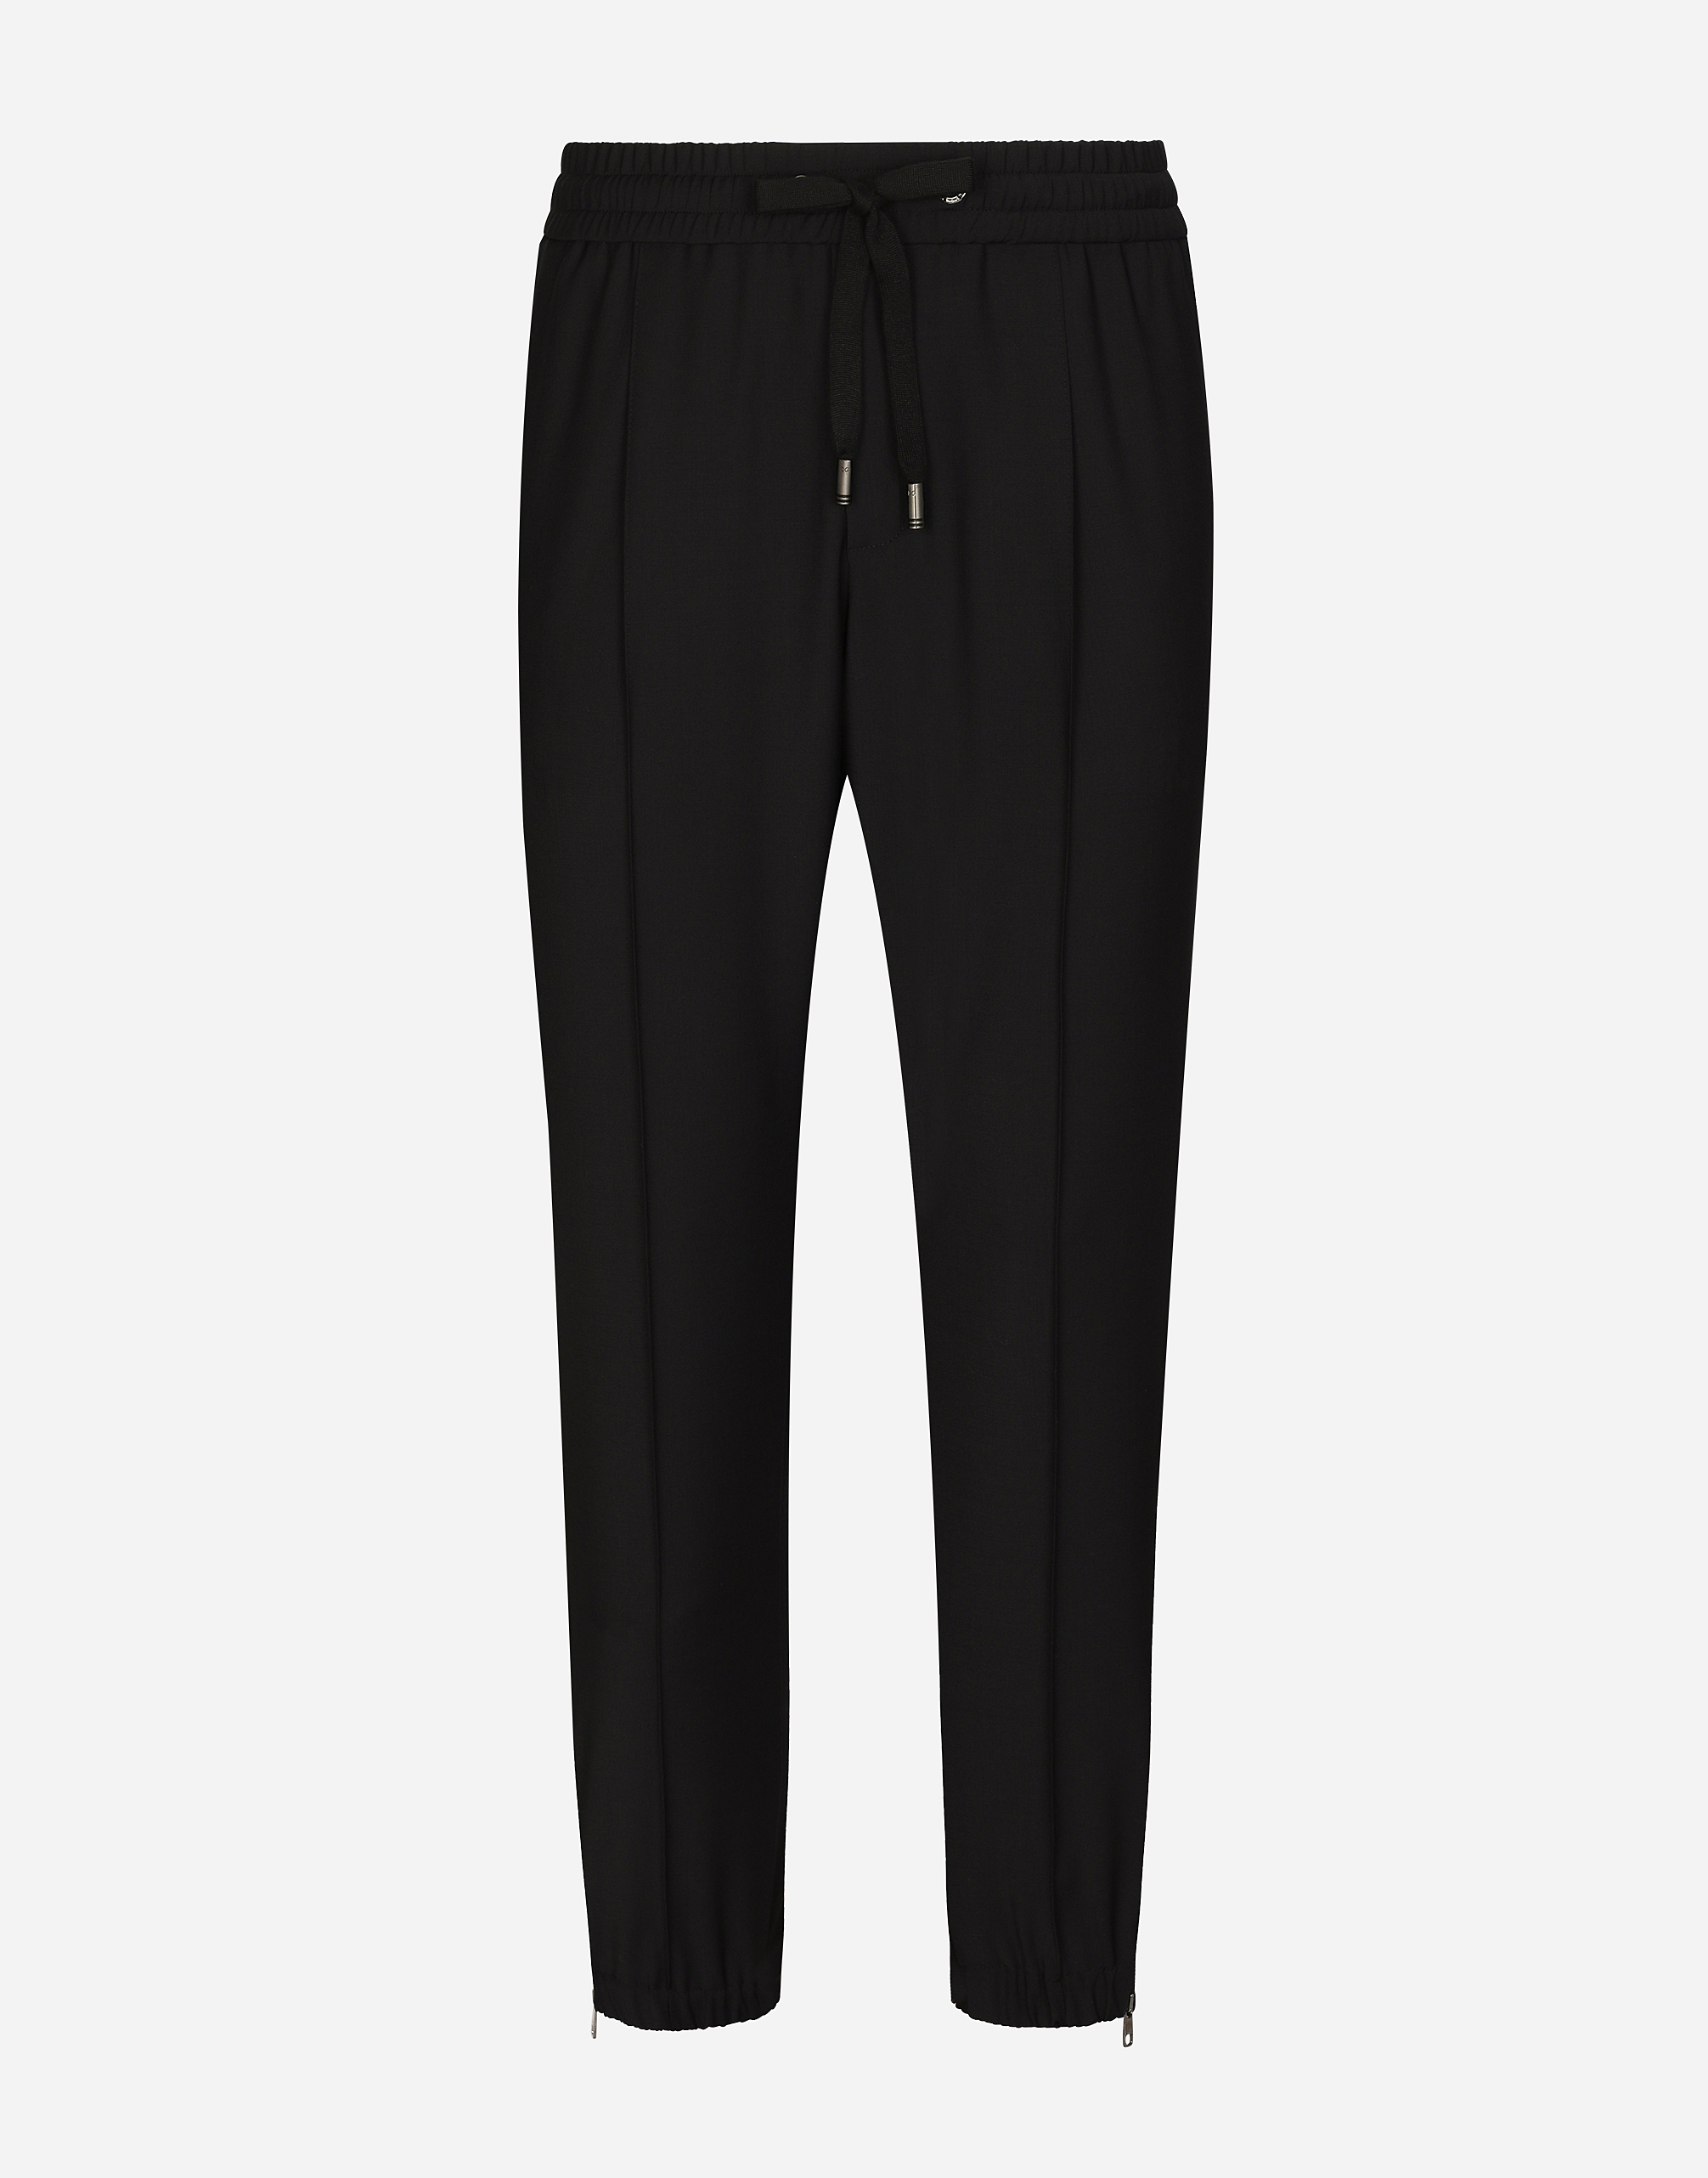 Stretch technical jersey jogging pants in Black